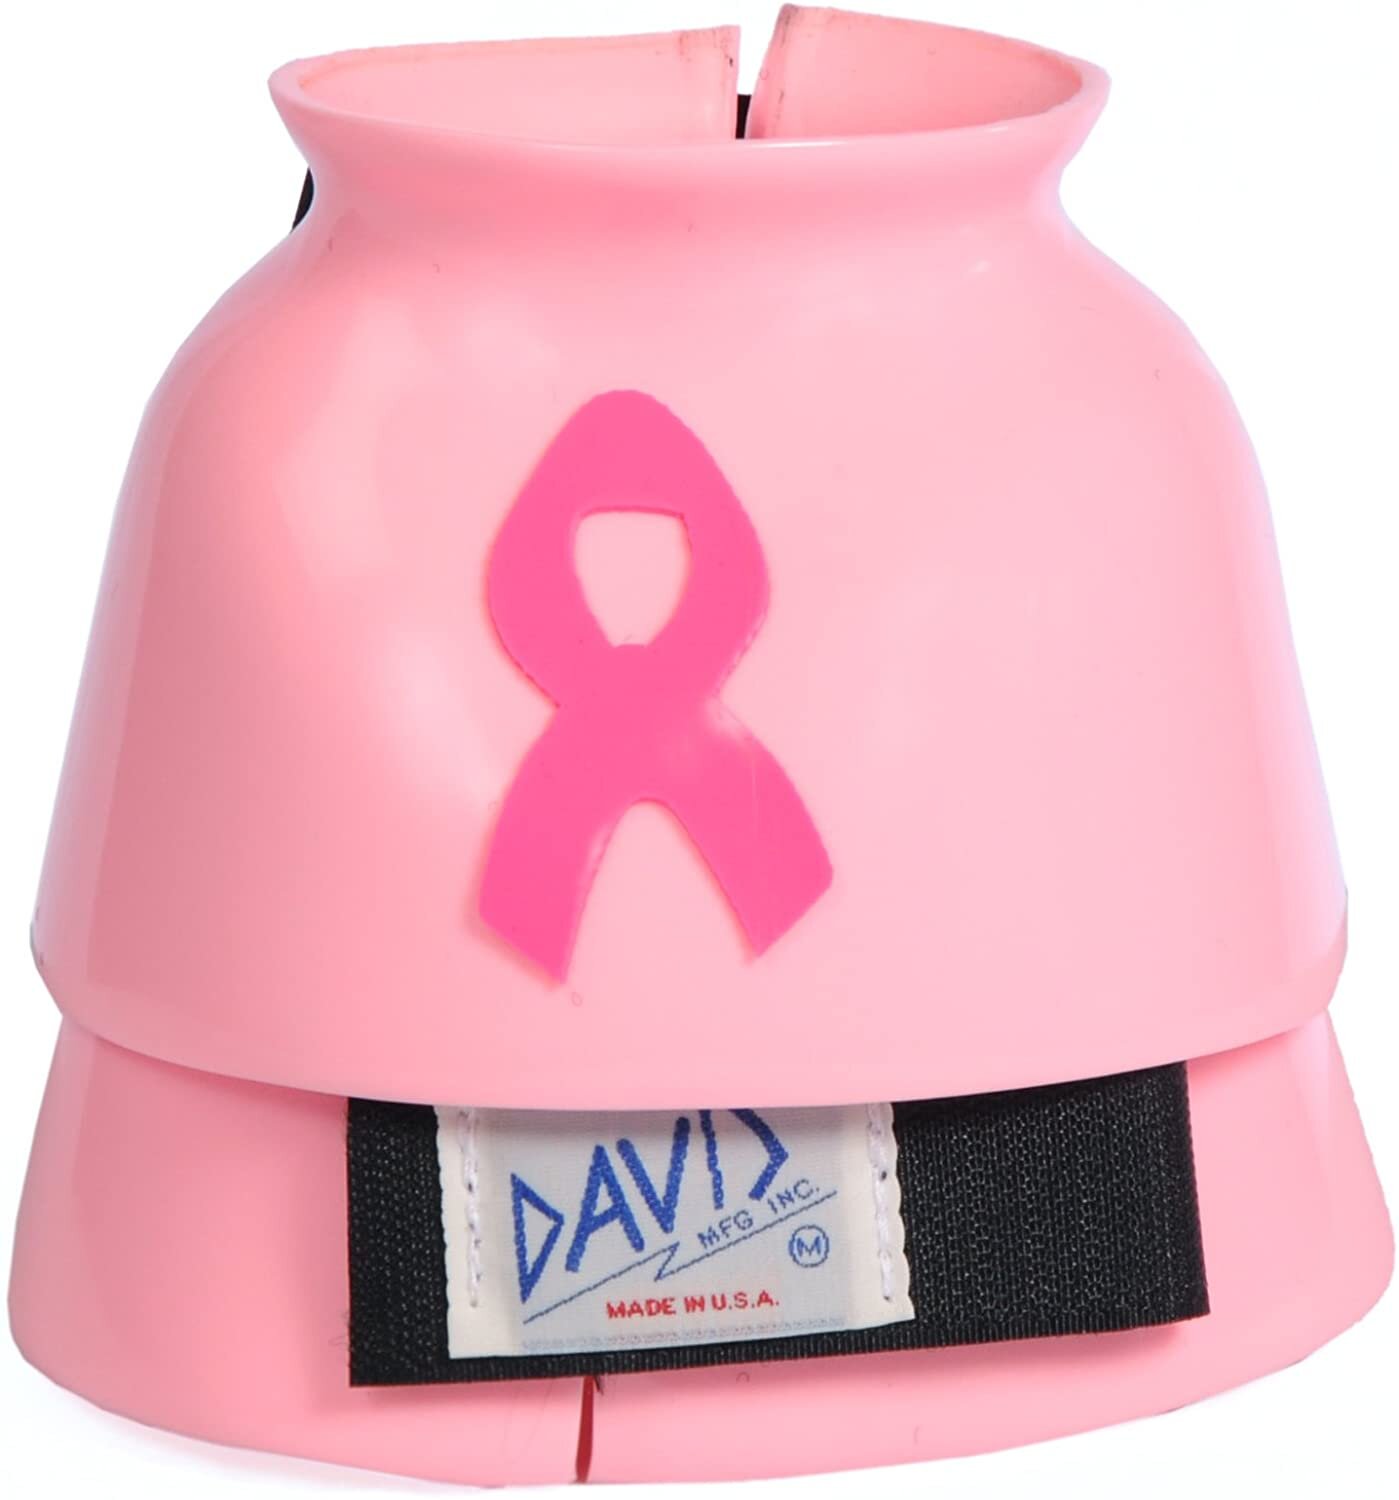 DAVIS Medium Pastel Pink Giving Cancer The Boot Bell Boots 